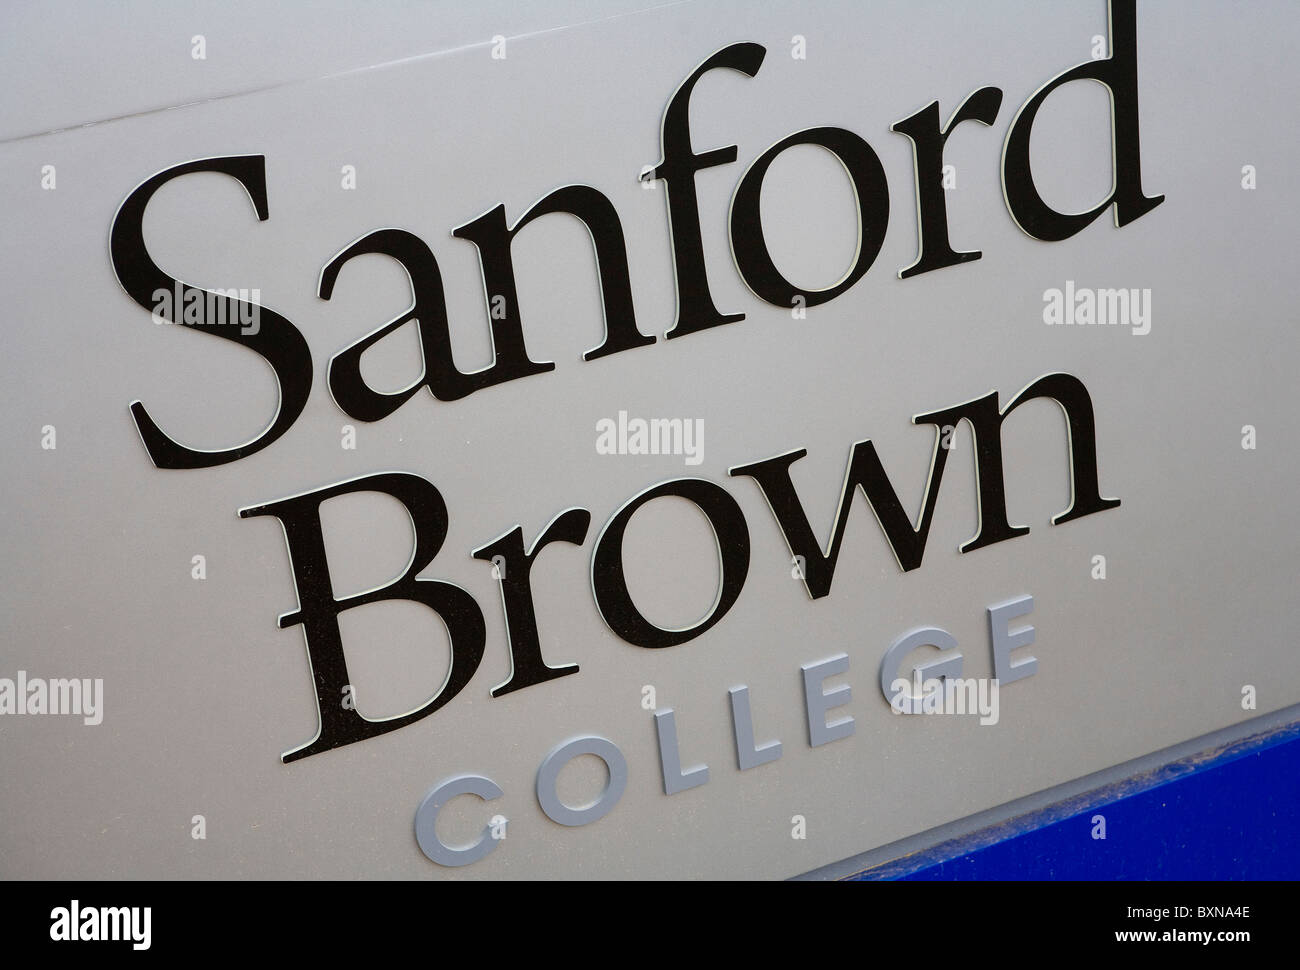 A Sanford Brown for-profit college.  Stock Photo